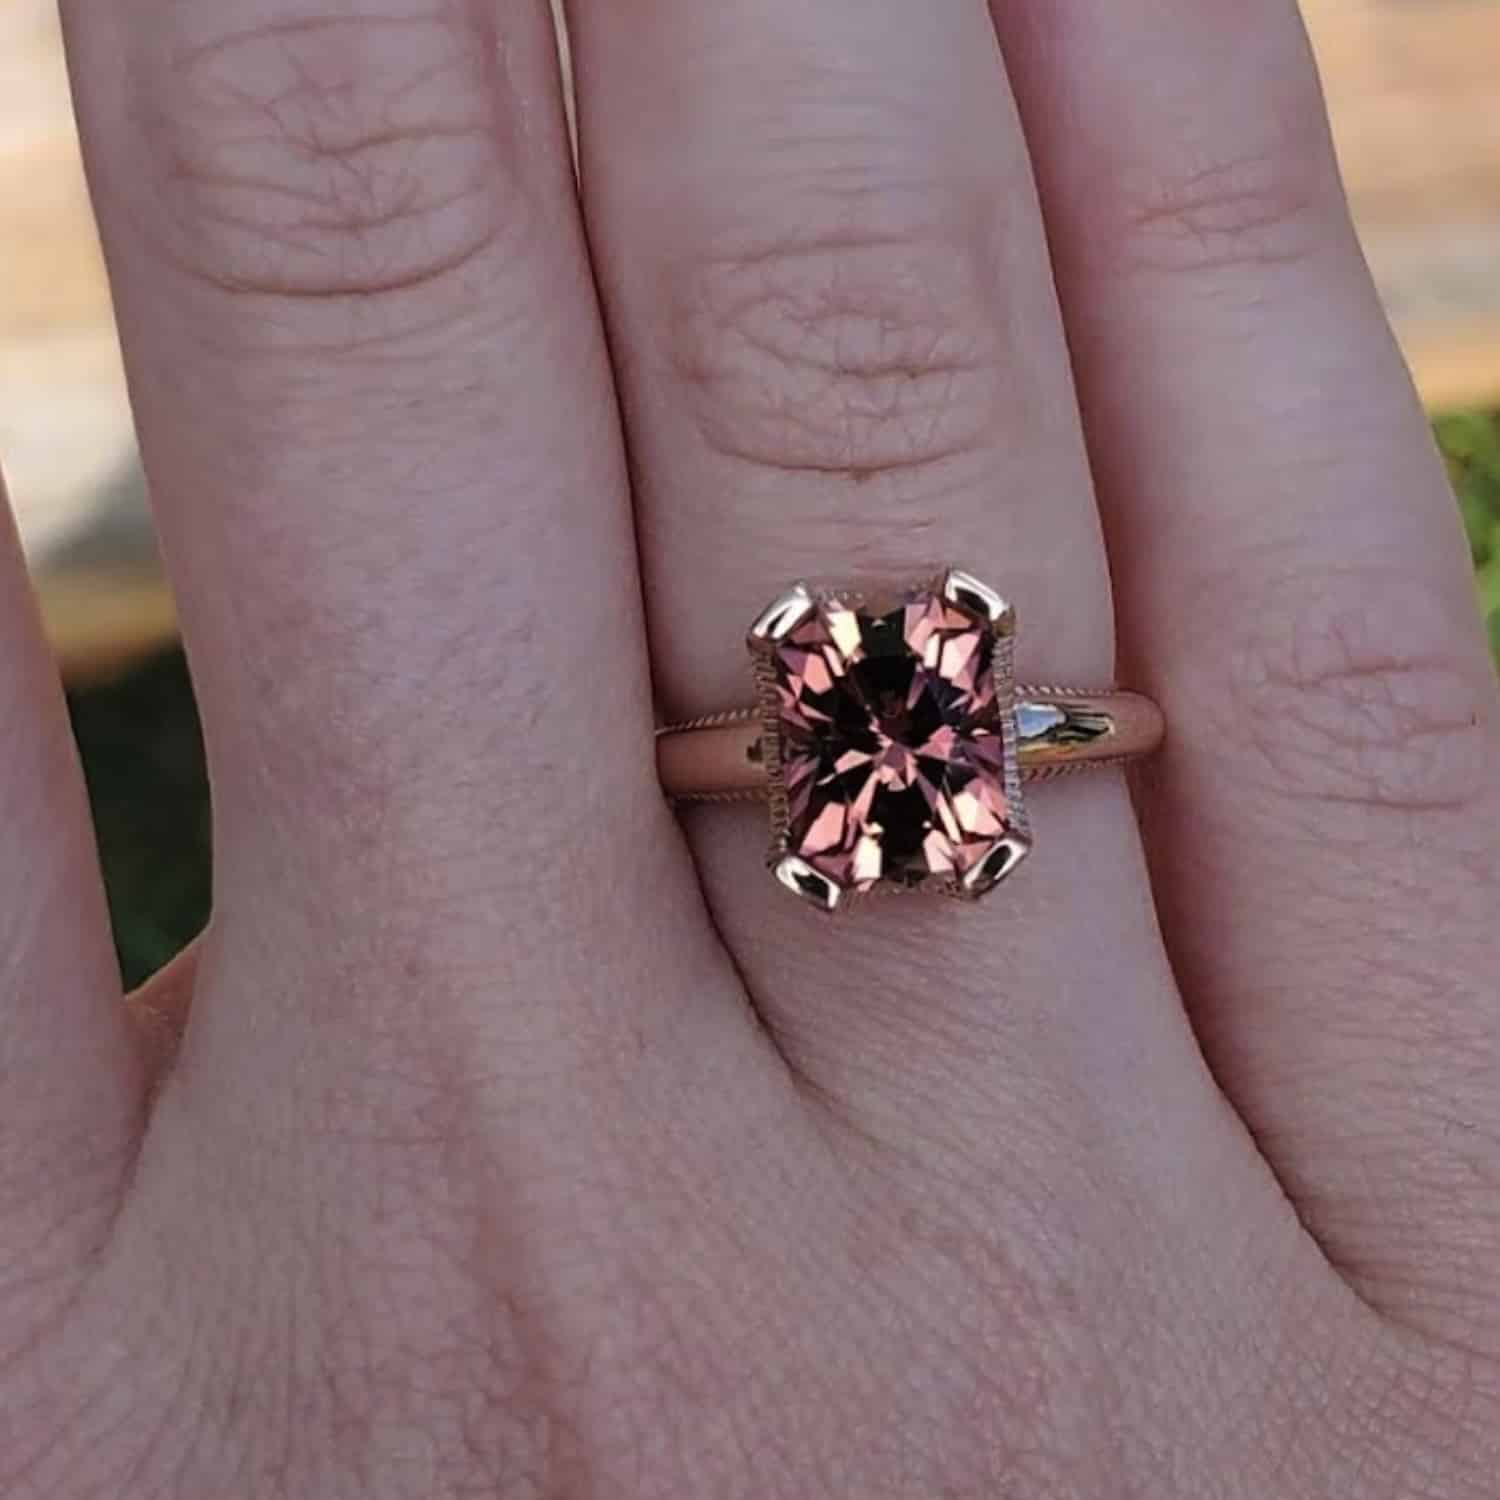 A photo from a customer review featuring a pink tourmaline in a pink gold "Narcissus" ring on the customer's right hand.